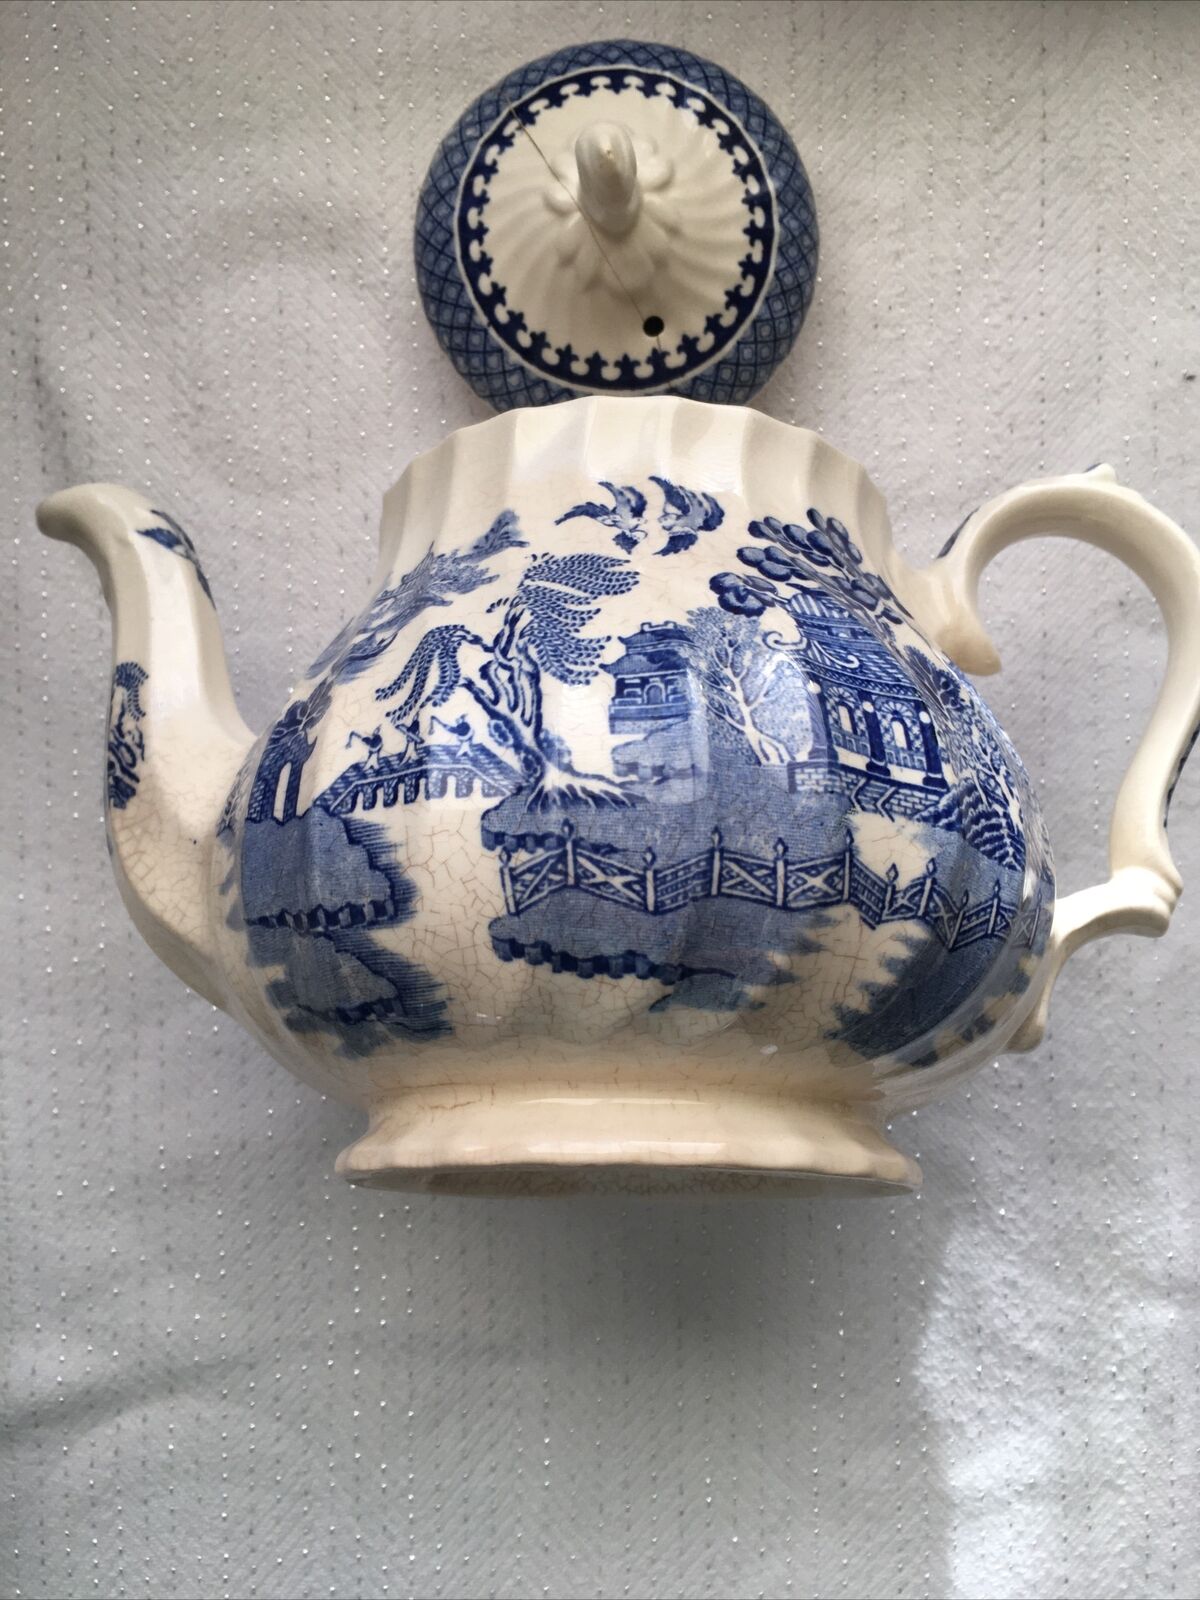 Vintage Sadler England Blue Willow Teapot Approx 7" Tall Cracked Lid